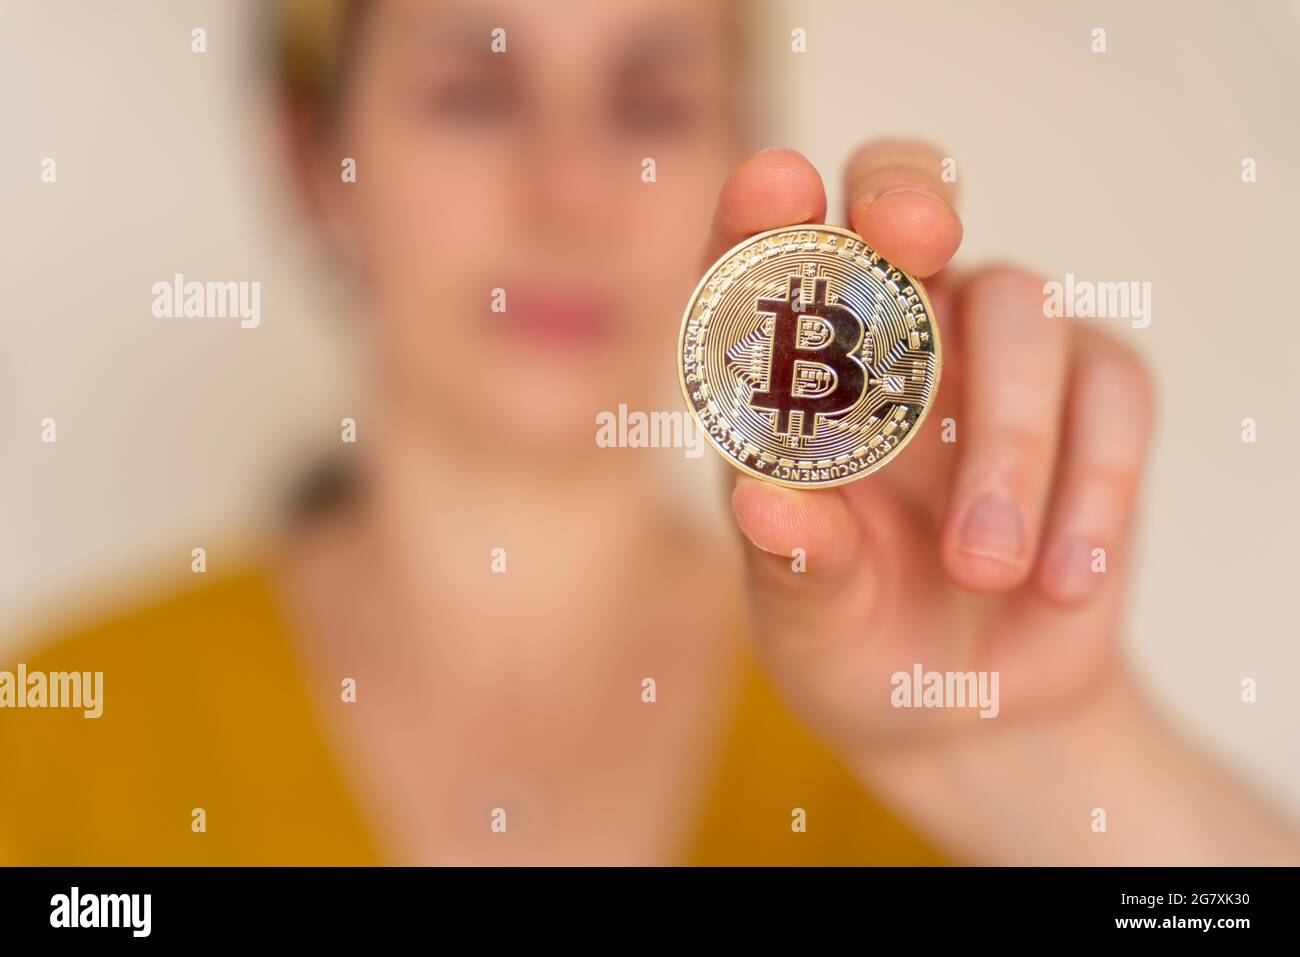 Close up view of woman holding Bitcoin cryptocurrency coin in her hand Stock Photo